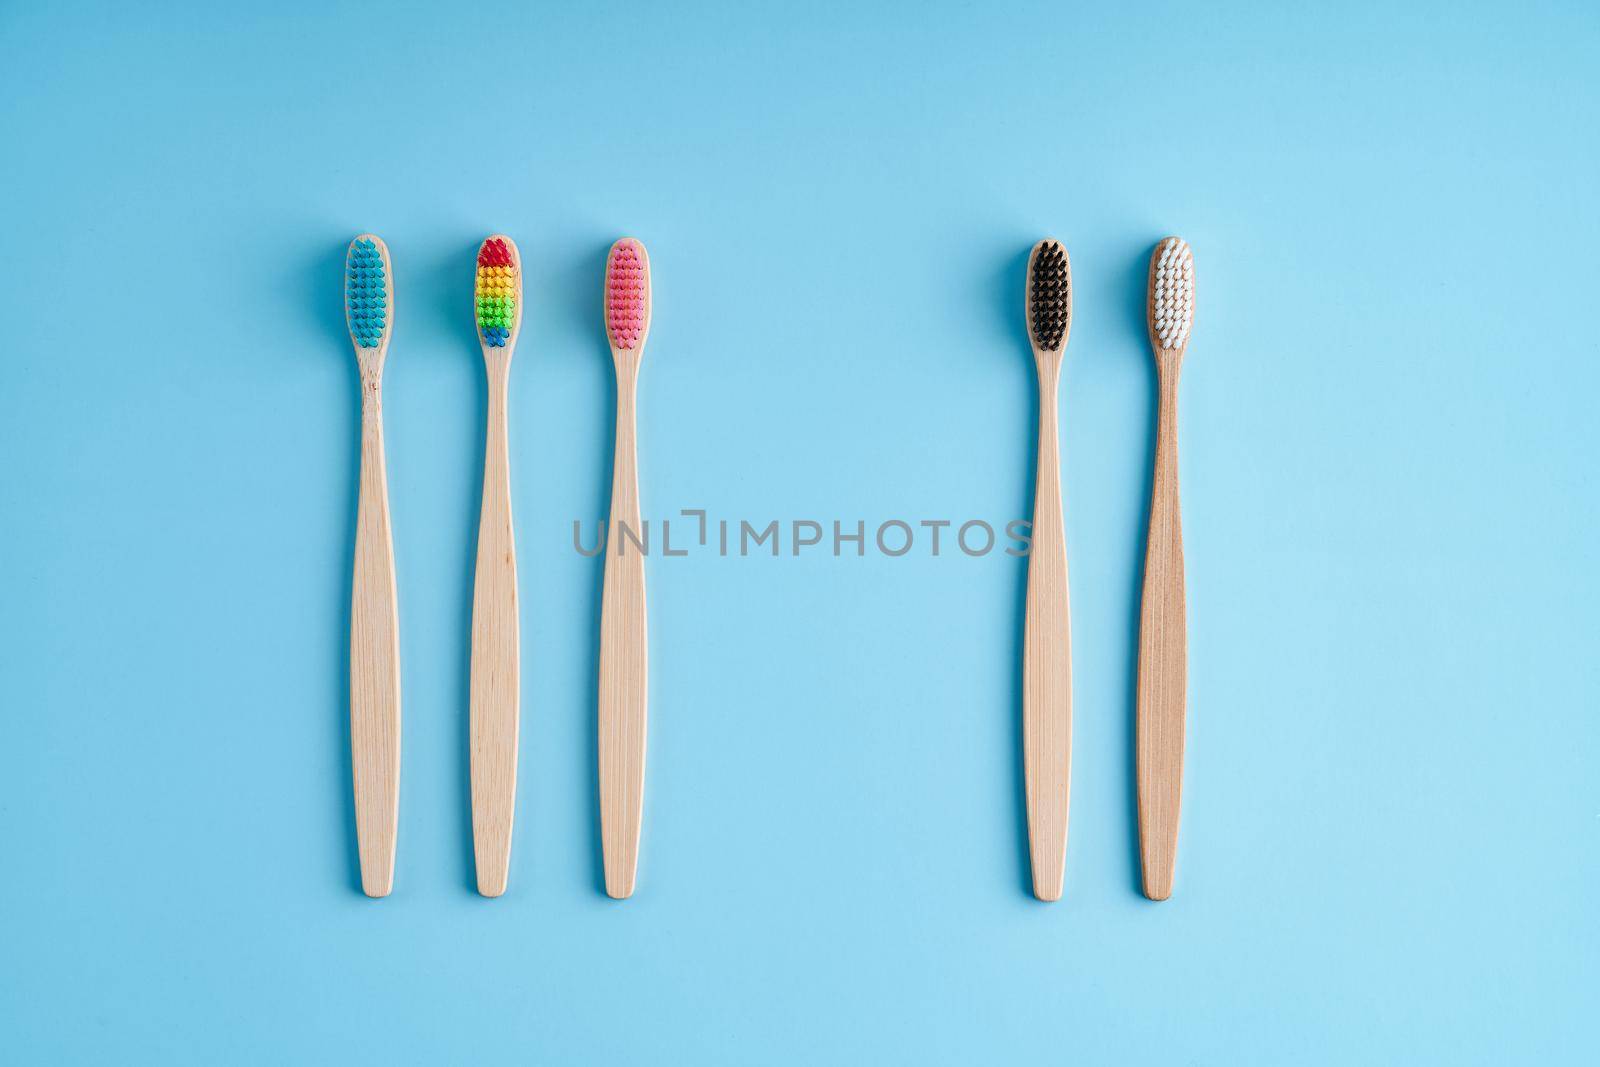 A bunch of eco-friendly bamboo toothbrushes. Global environmental trends. Gender and racial inequality. toothbrushes of different genders.